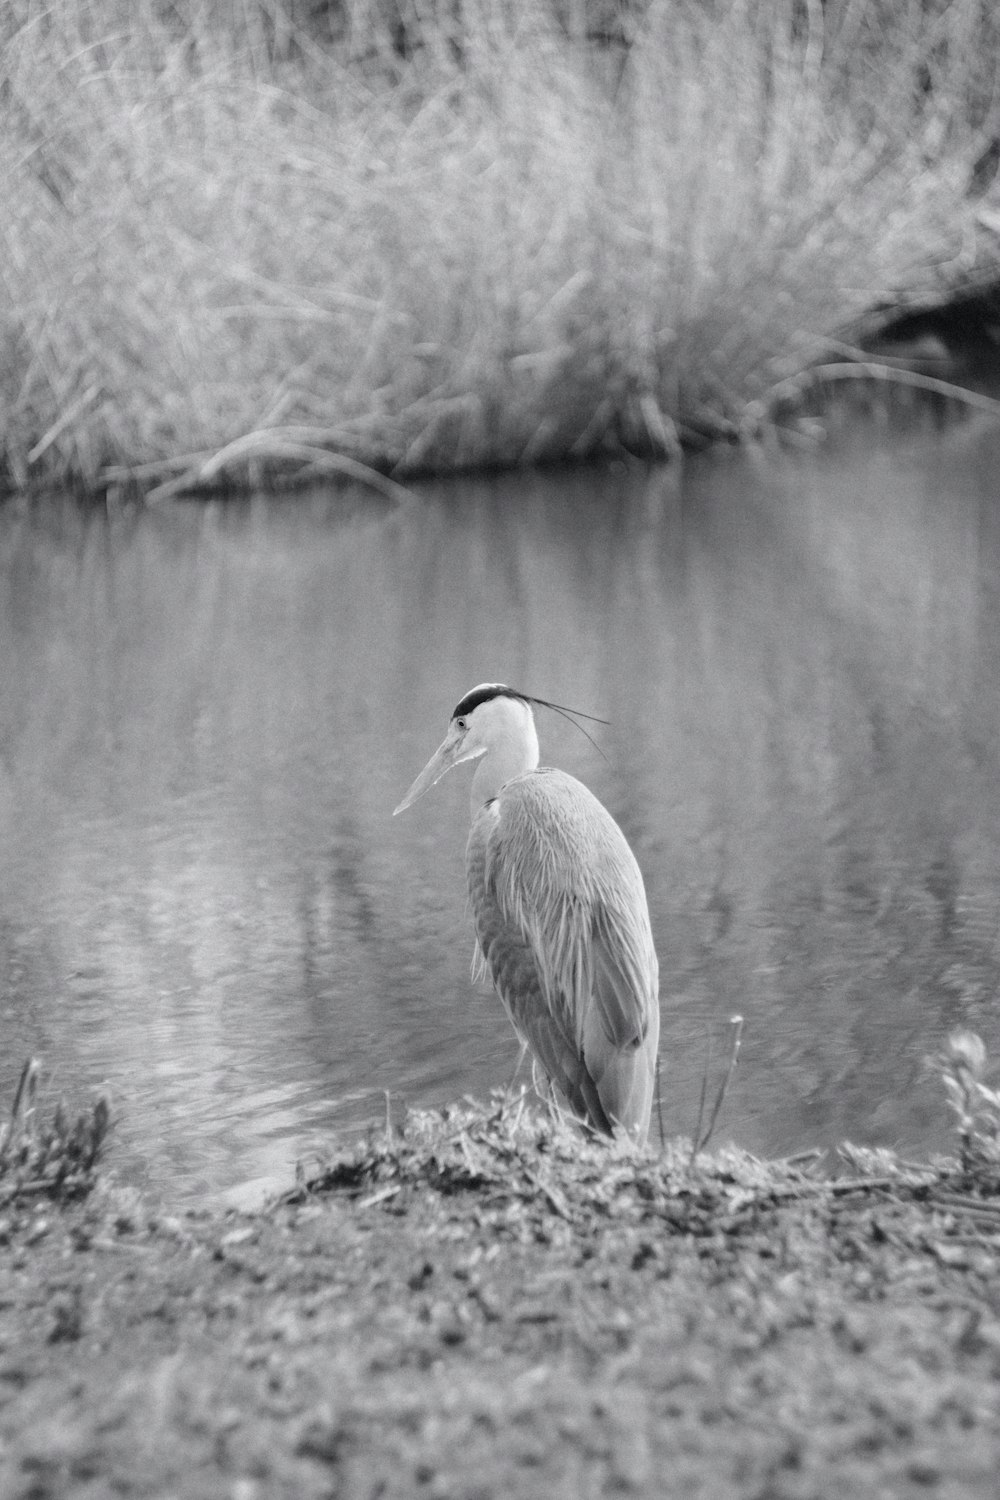 a black and white photo of a bird standing on the bank of a river